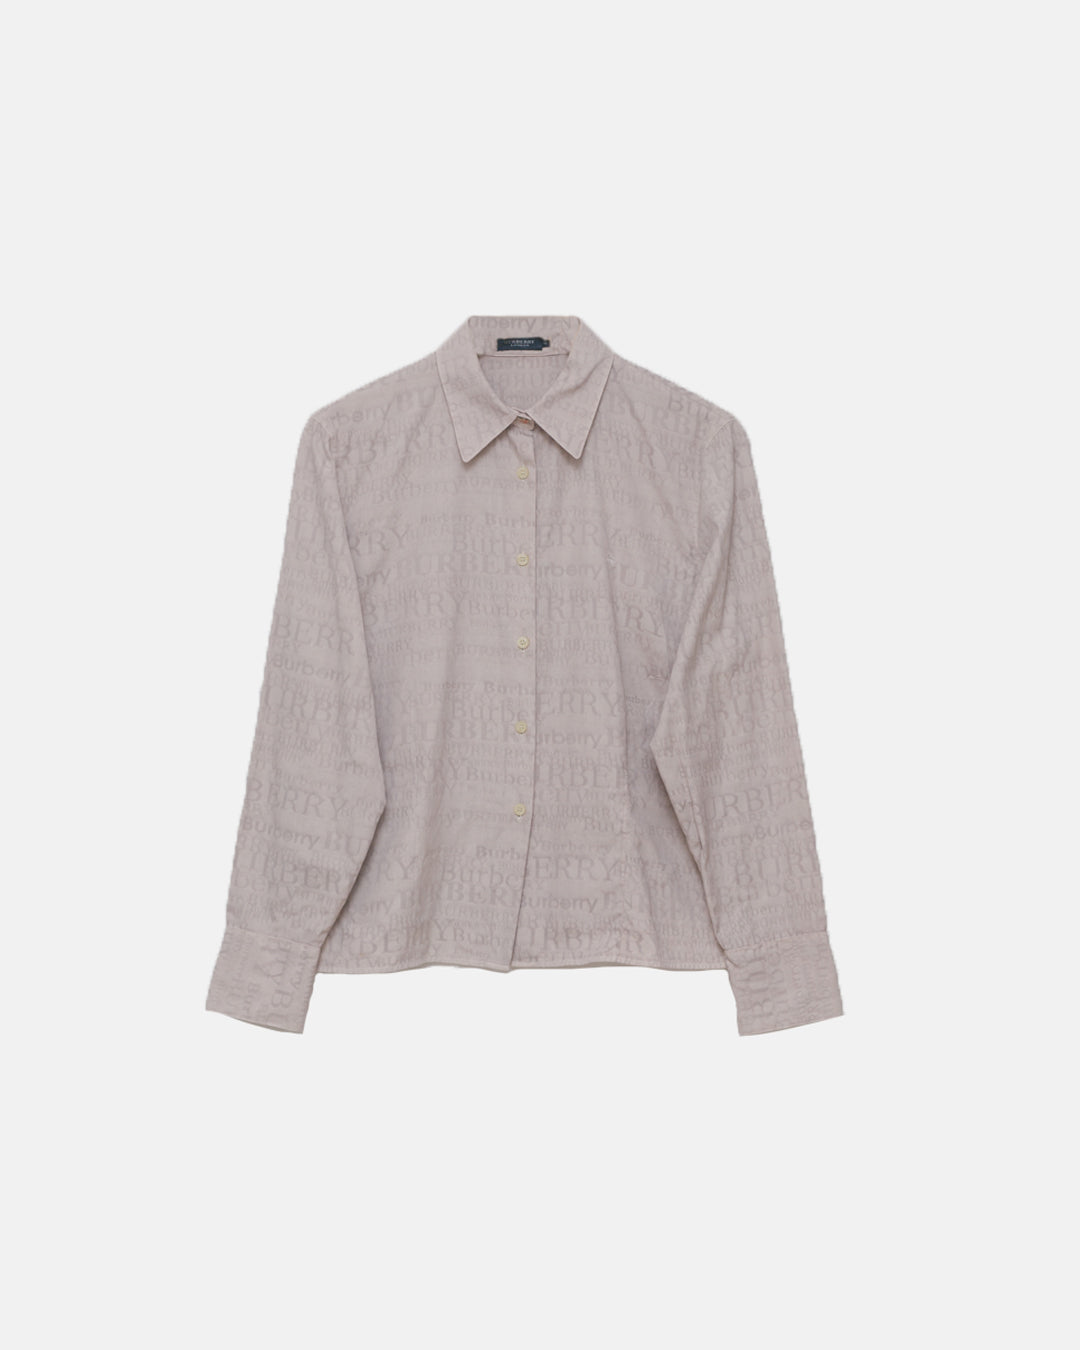 Burberry Embossed Logo Button Down Shirt